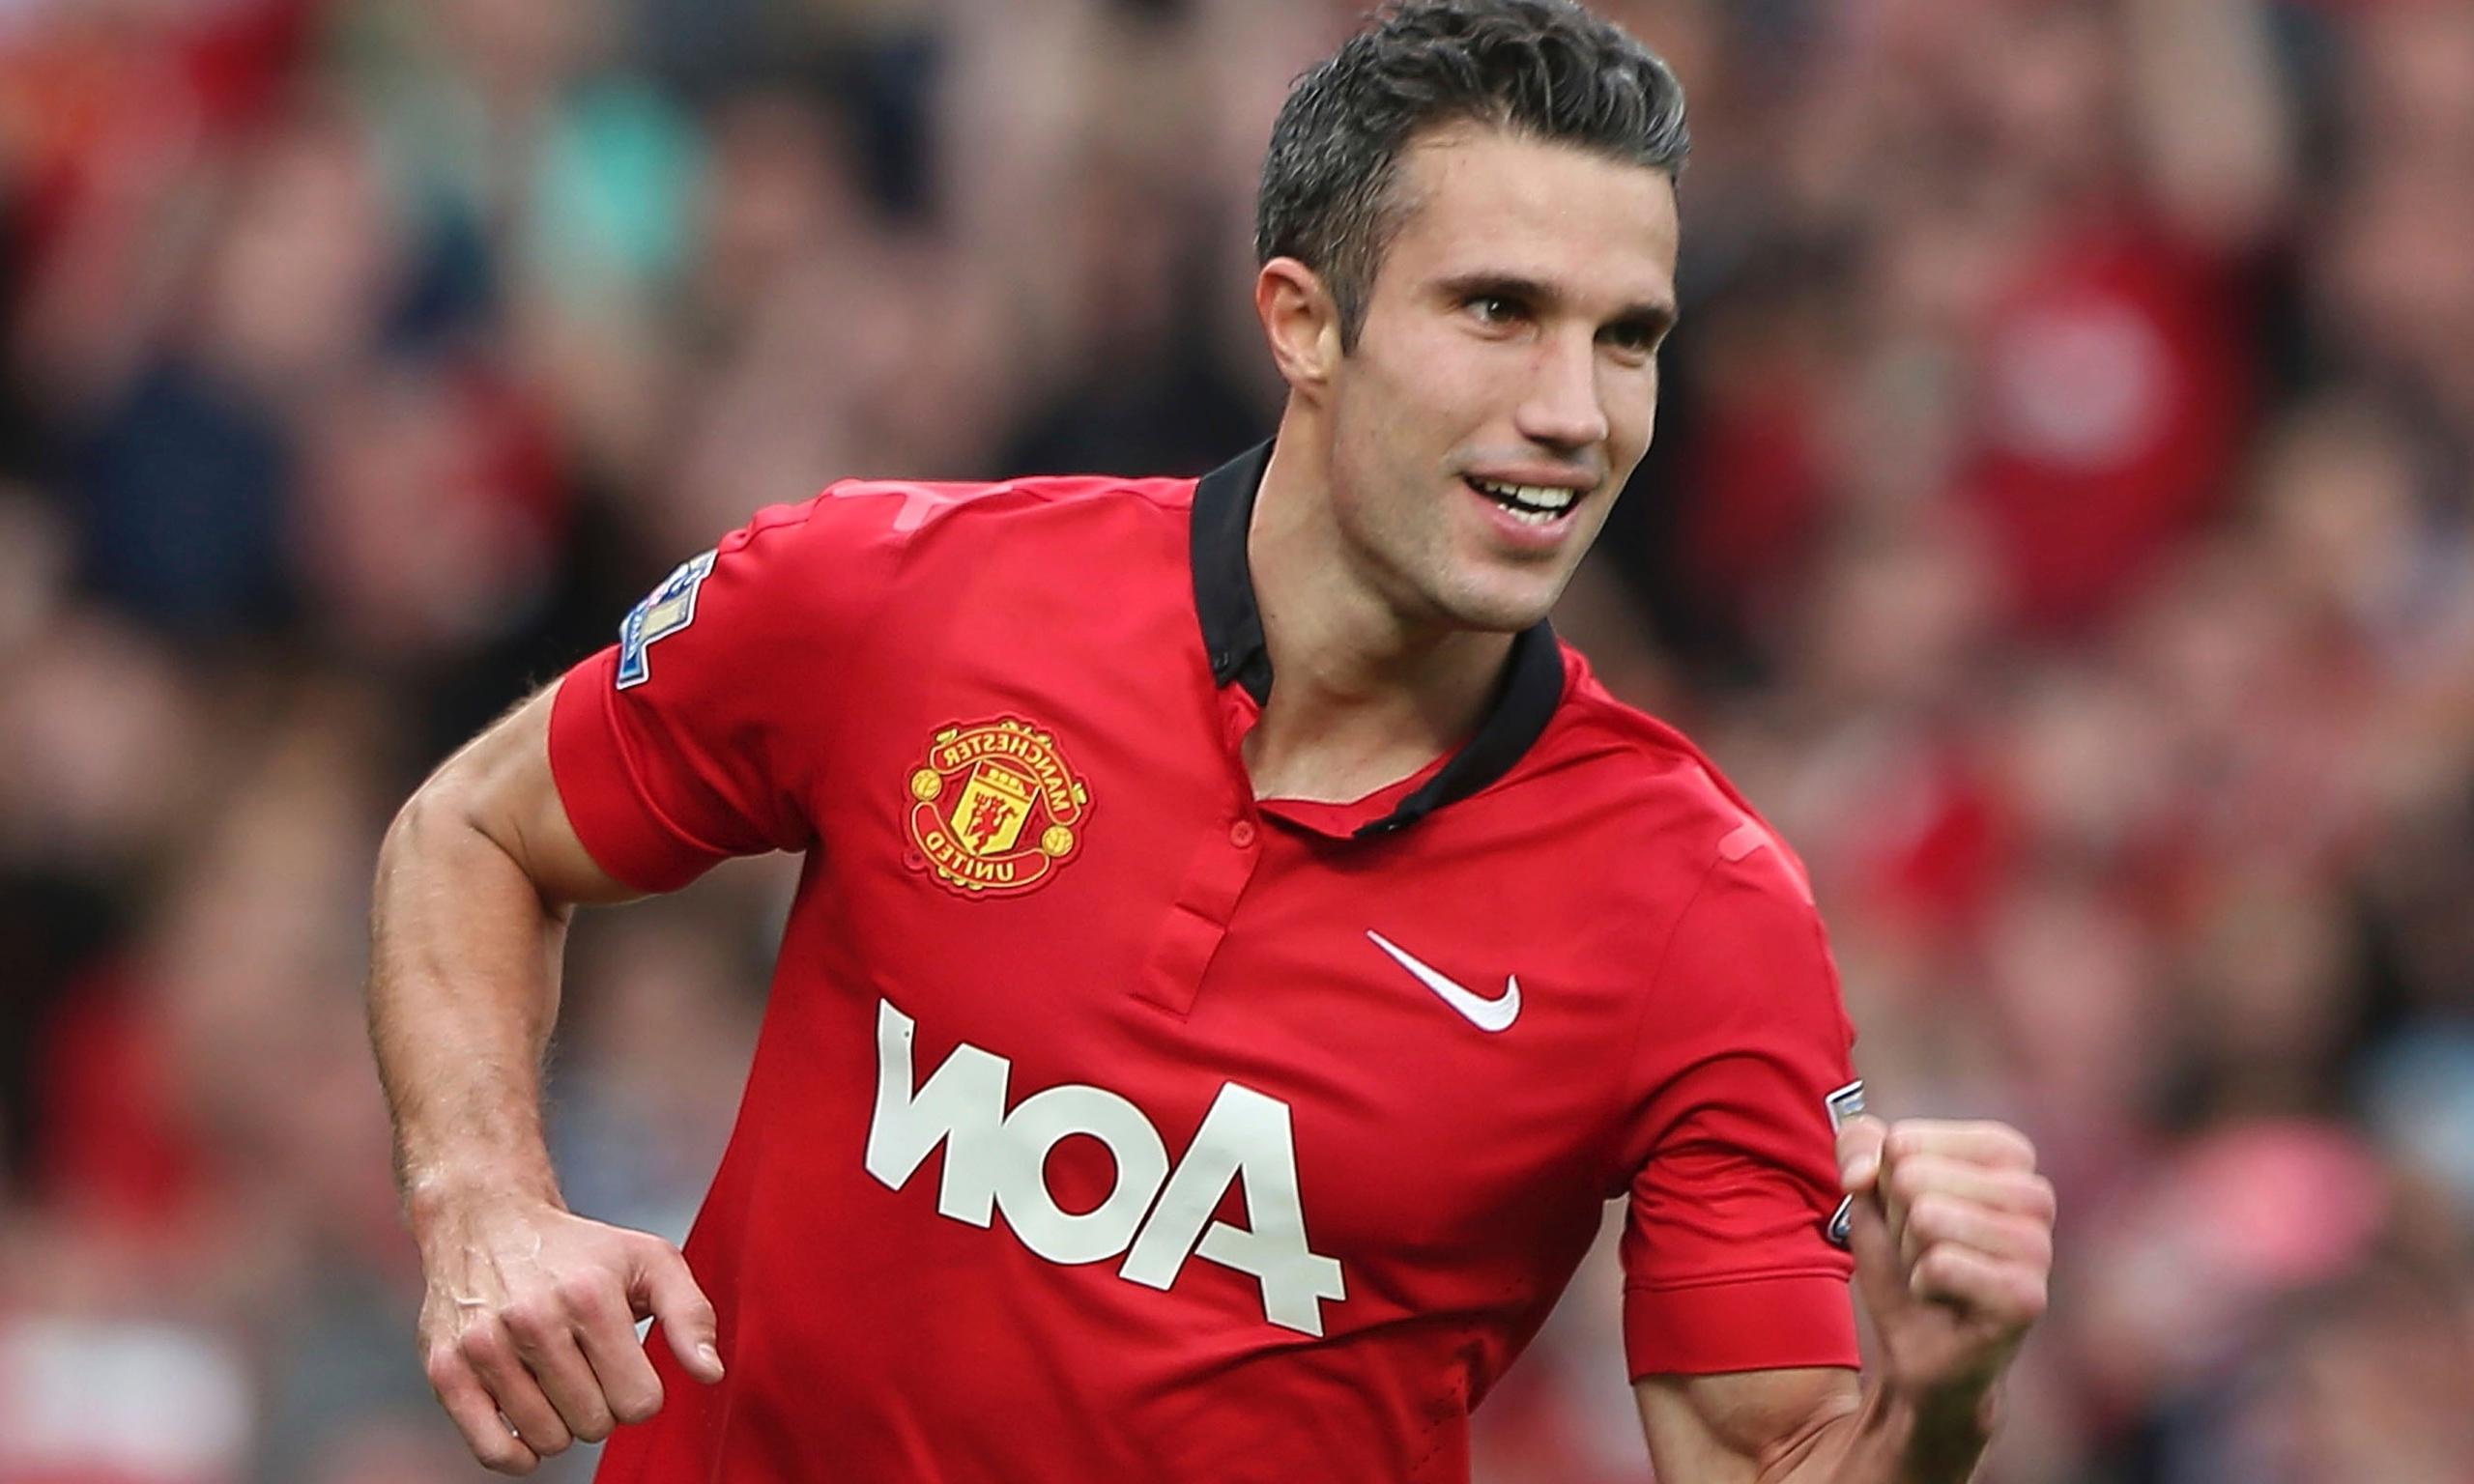 Another Picture of Robin van Persie Soccer Player